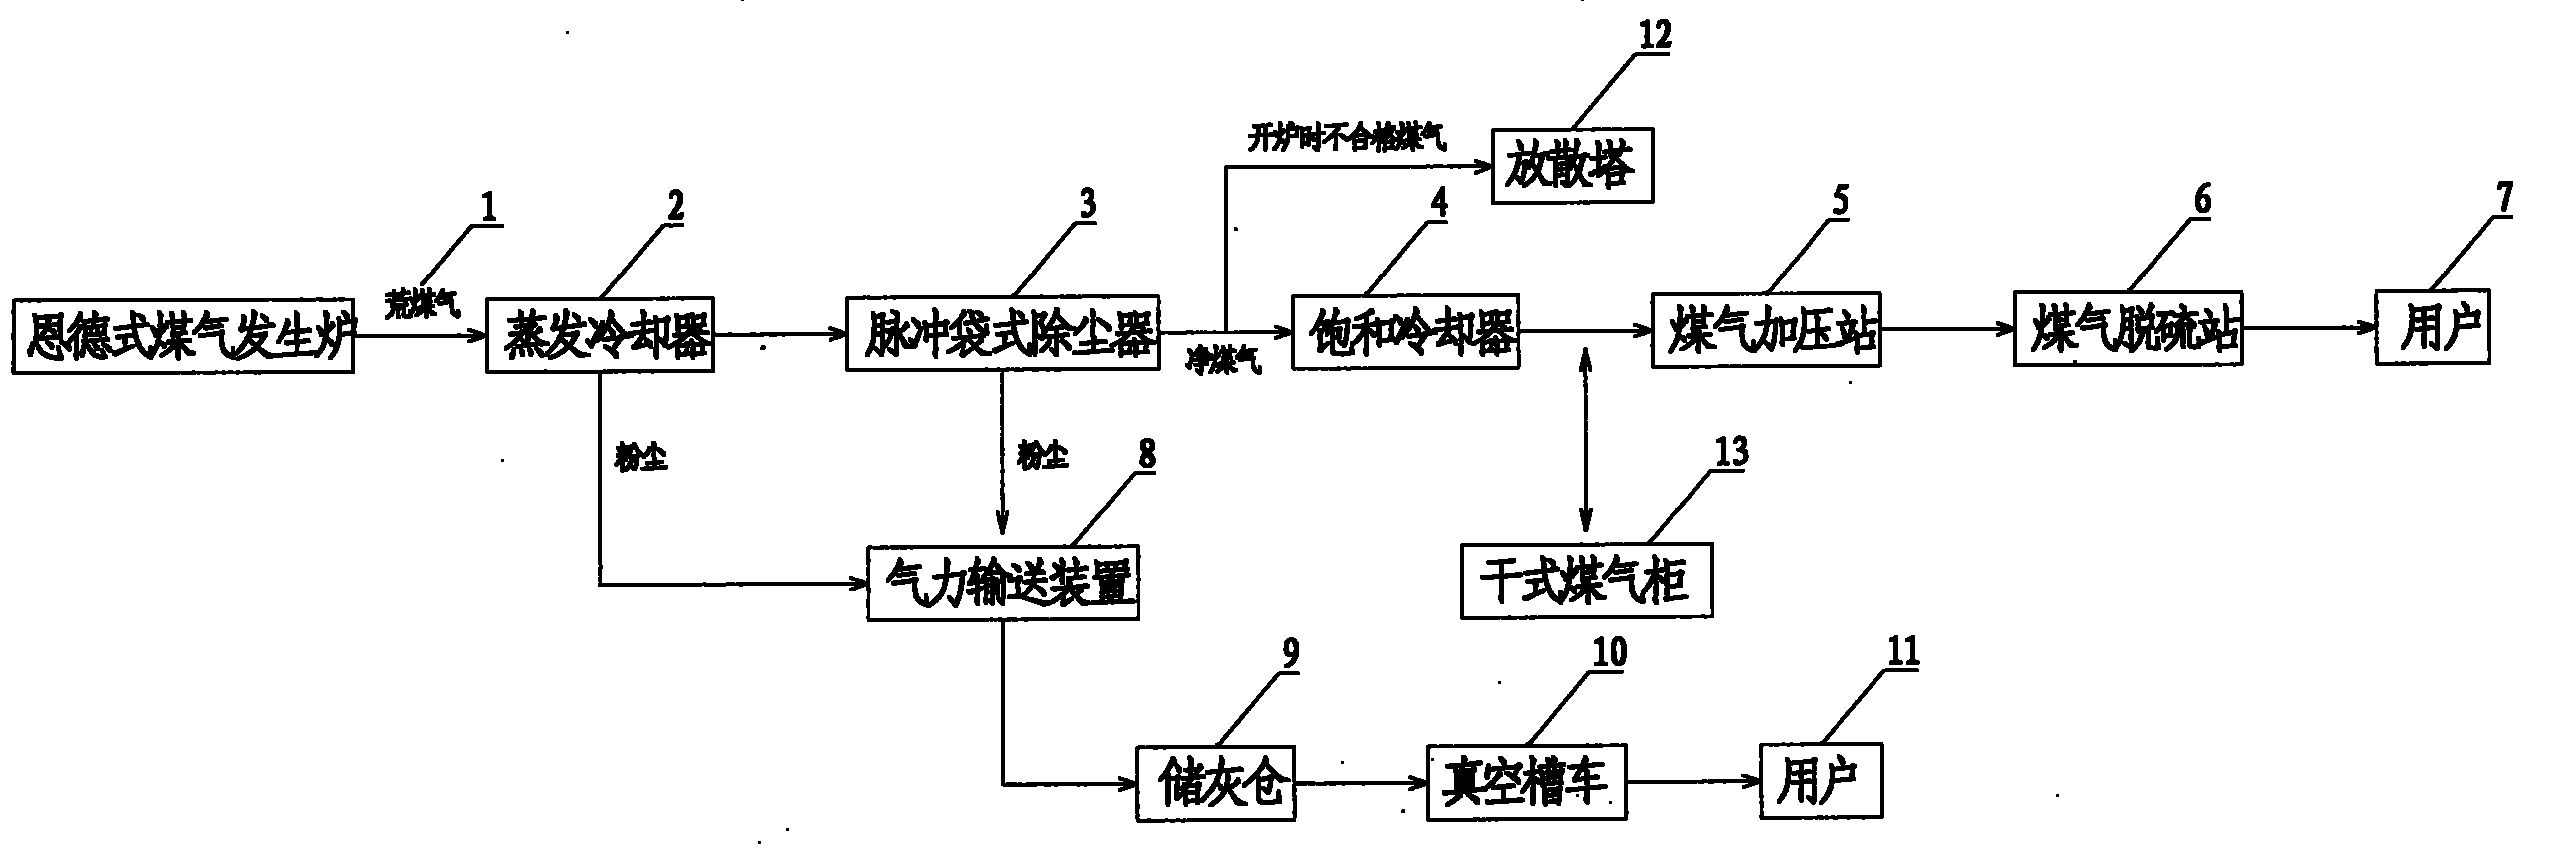 Process method for purifying raw coke oven gas from pulverized coal gasification furnace